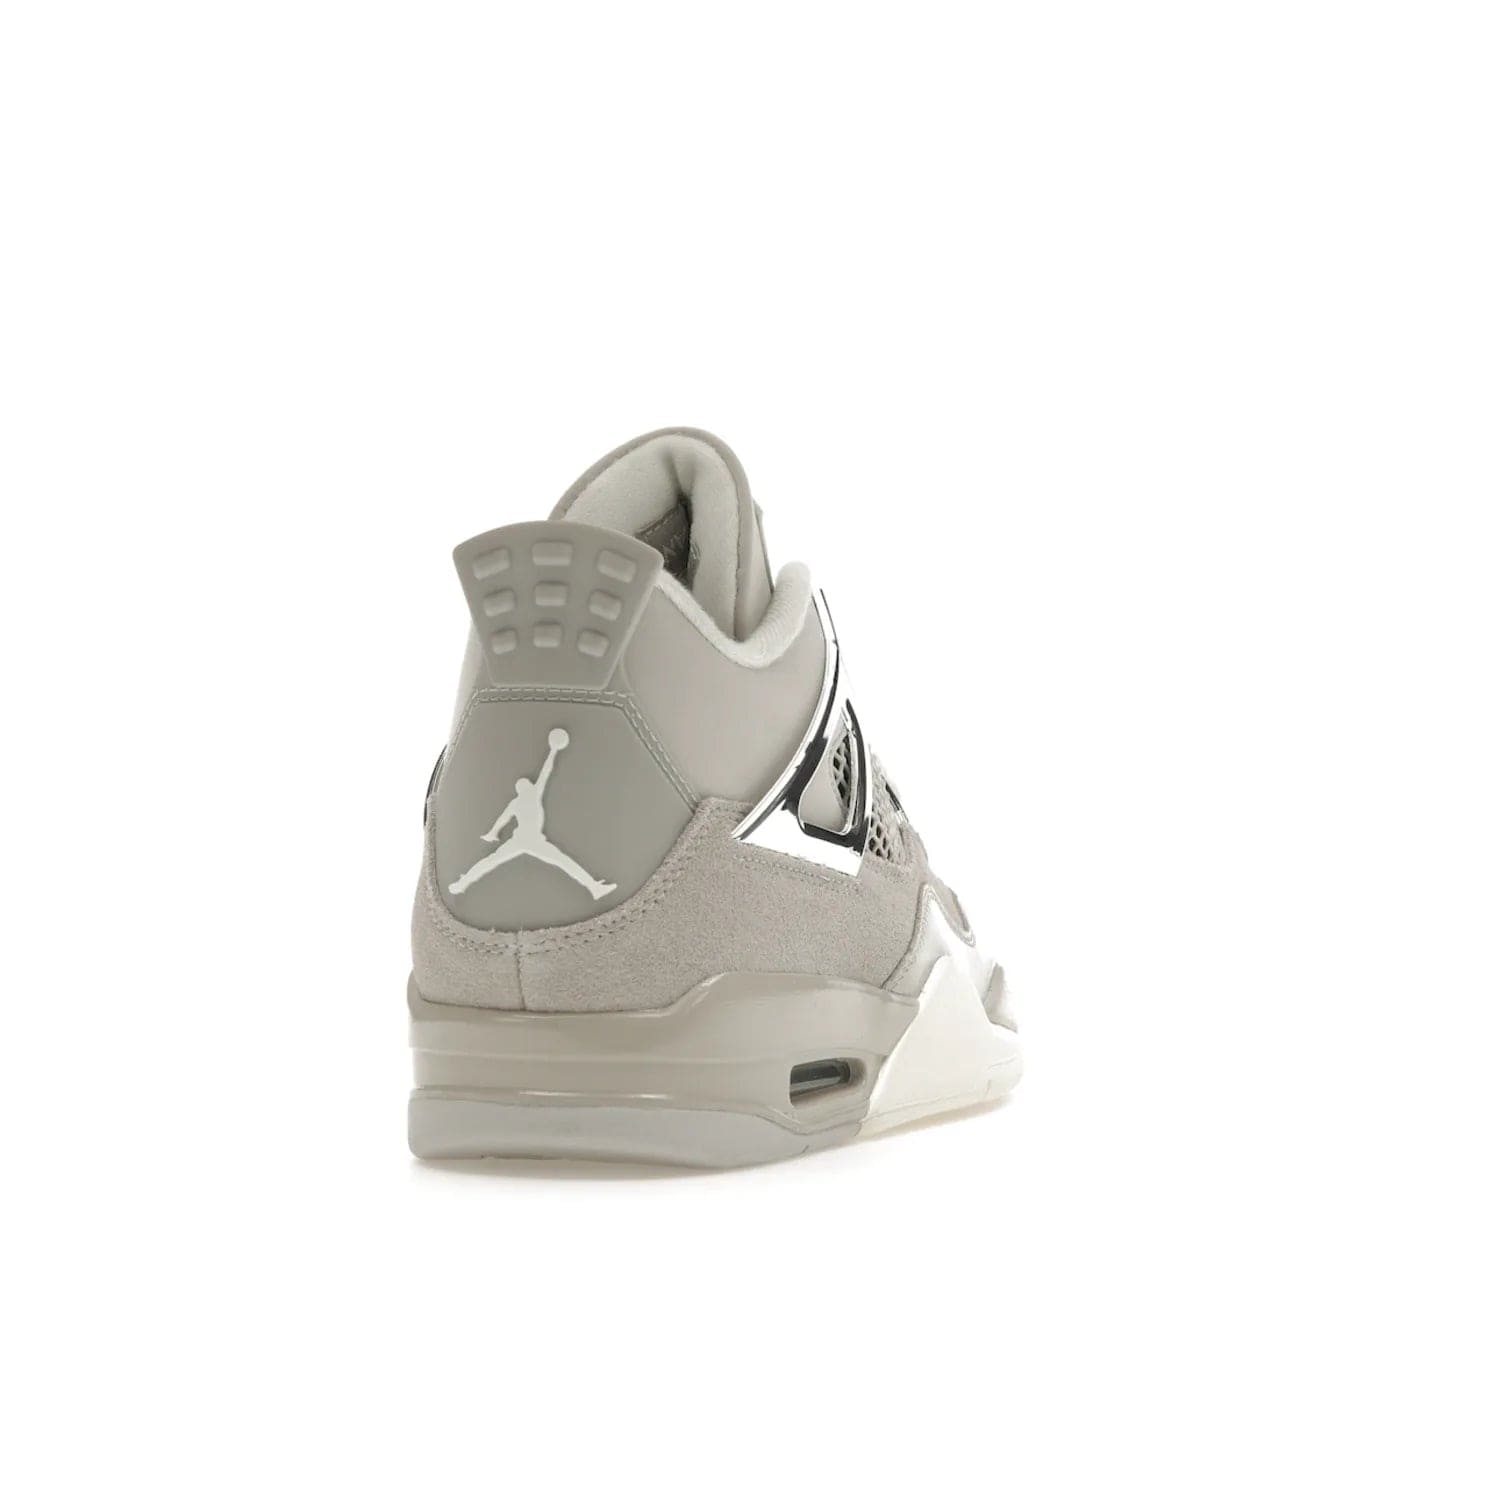 Jordan 4 Retro Frozen Moments (Women's) - Image 30 - Only at www.BallersClubKickz.com - The Jordan 4 Retro Frozen Moments is a stylish blend of classic design elements and modern tones. Featuring suede and leather overlays in a light iron-ore, sail, neutral grey, black, and metallic silver colorway. Get this iconic high-performance sneaker for $210.